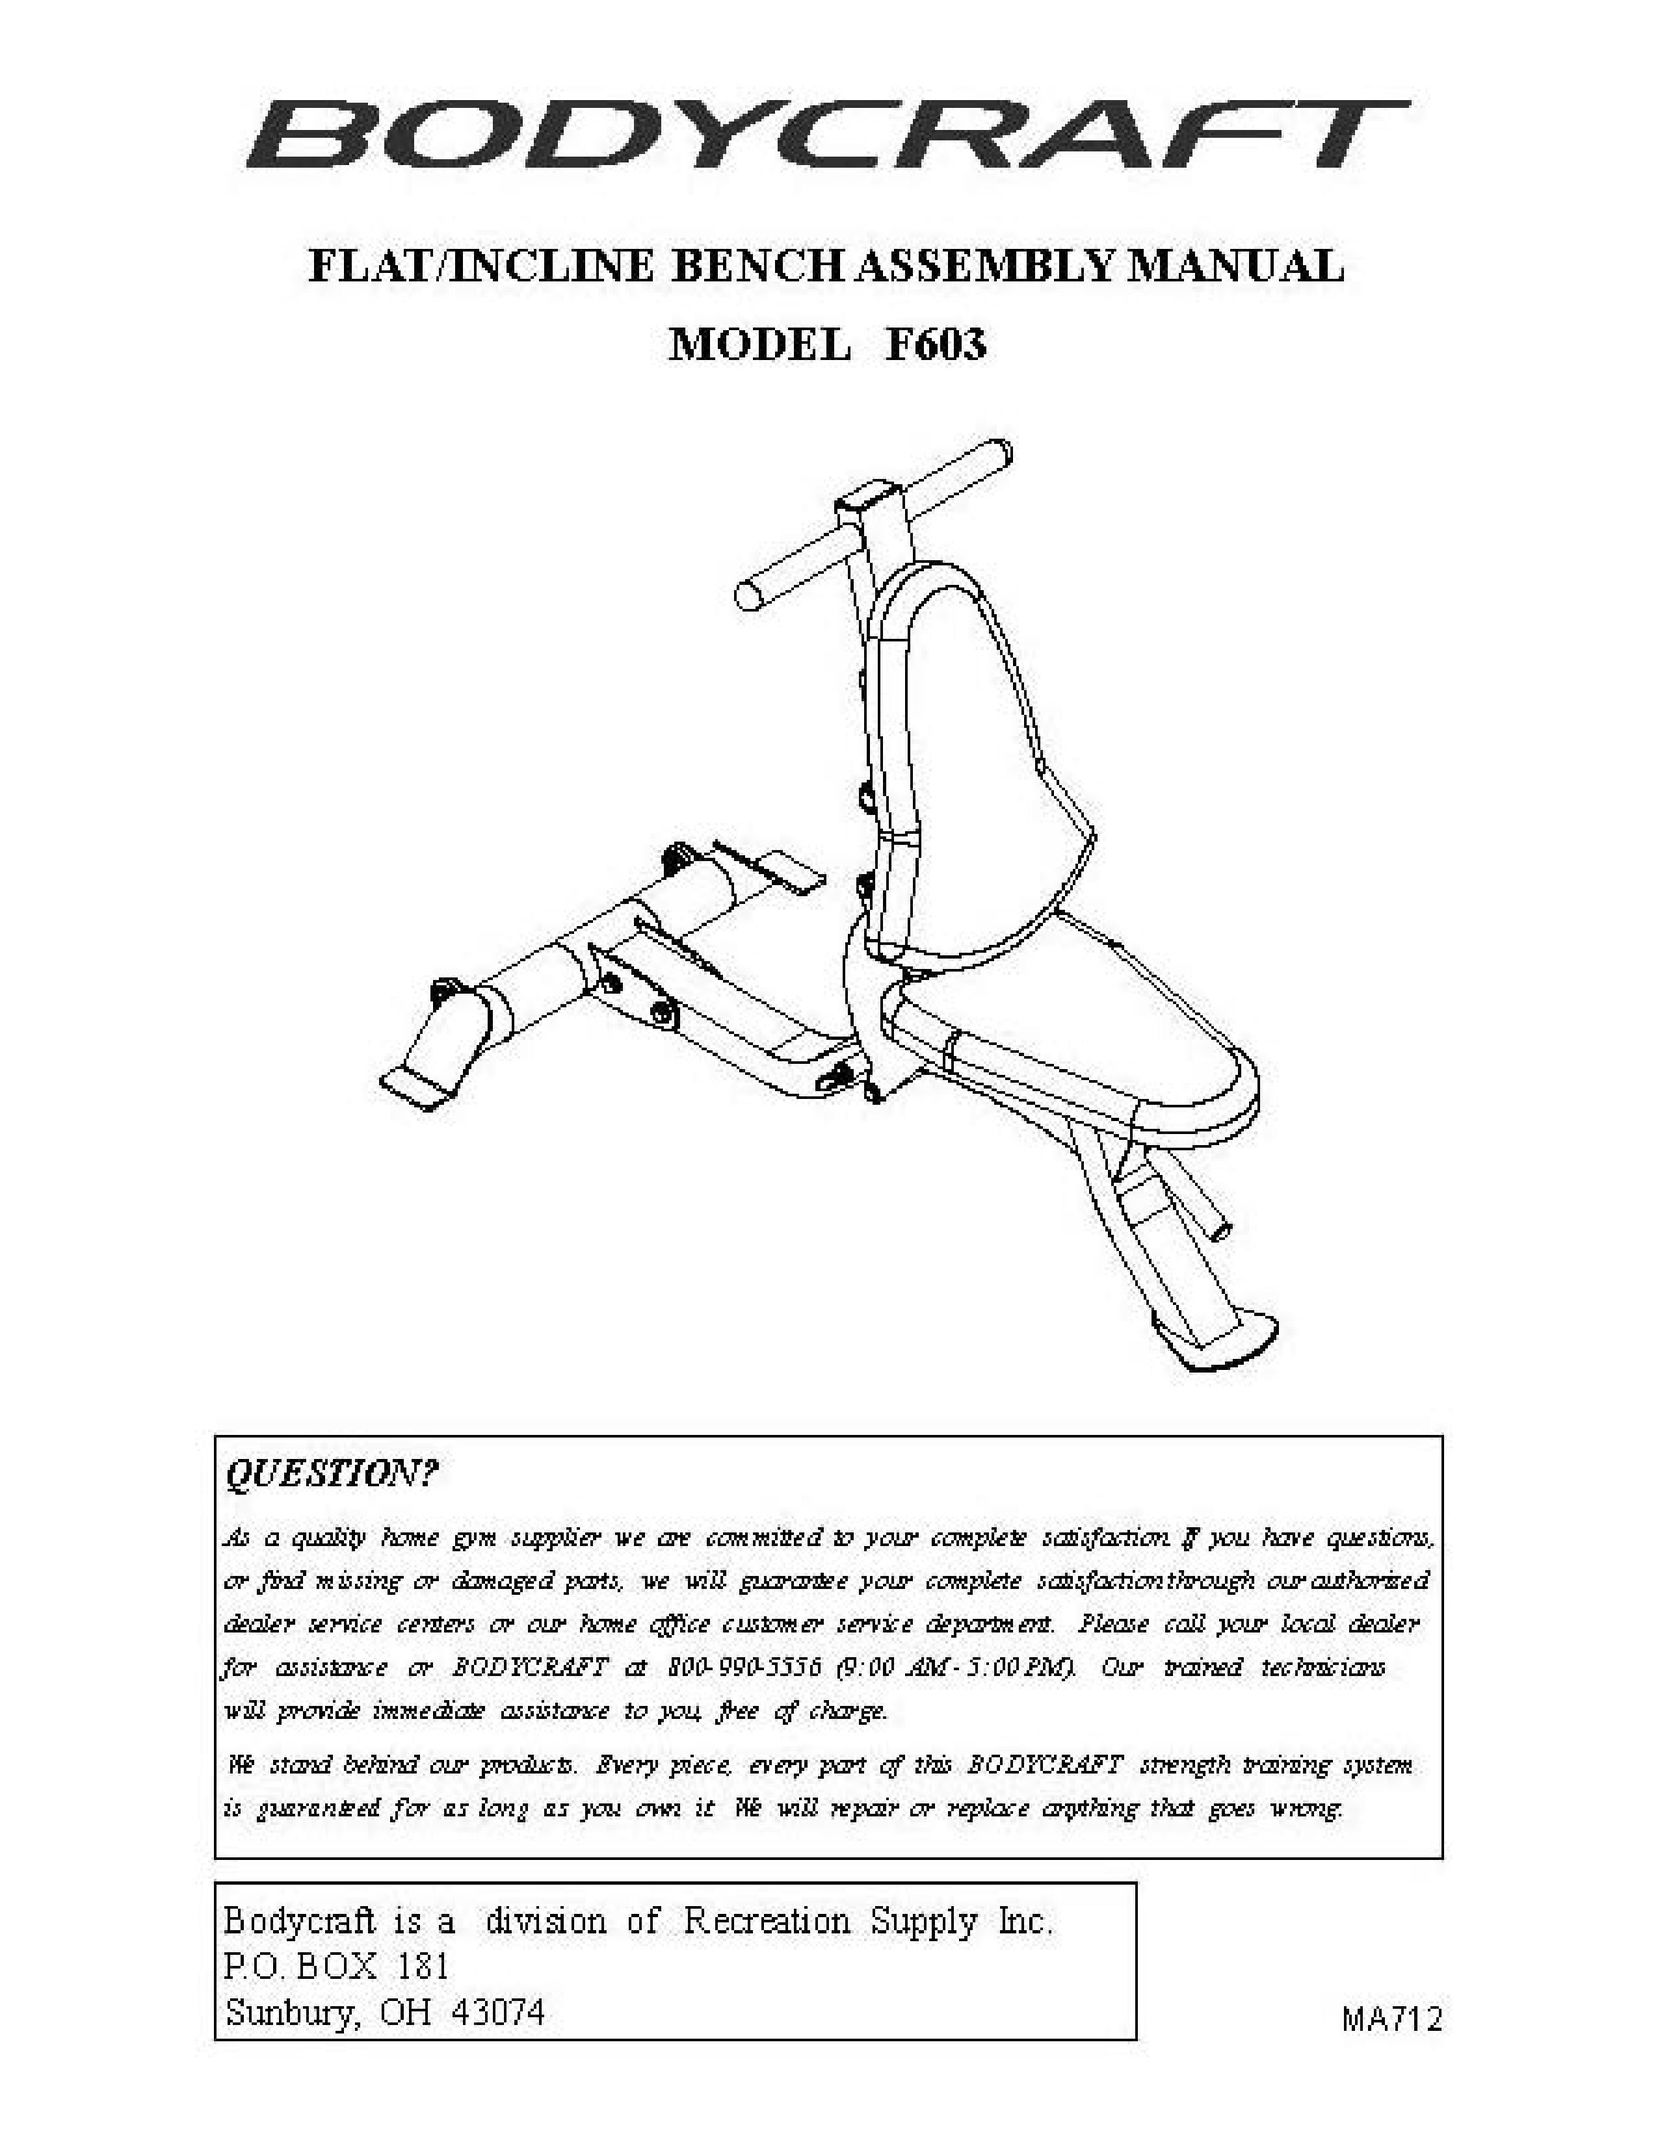 BodyCraft F603 Home Gym User Manual (Page 1)